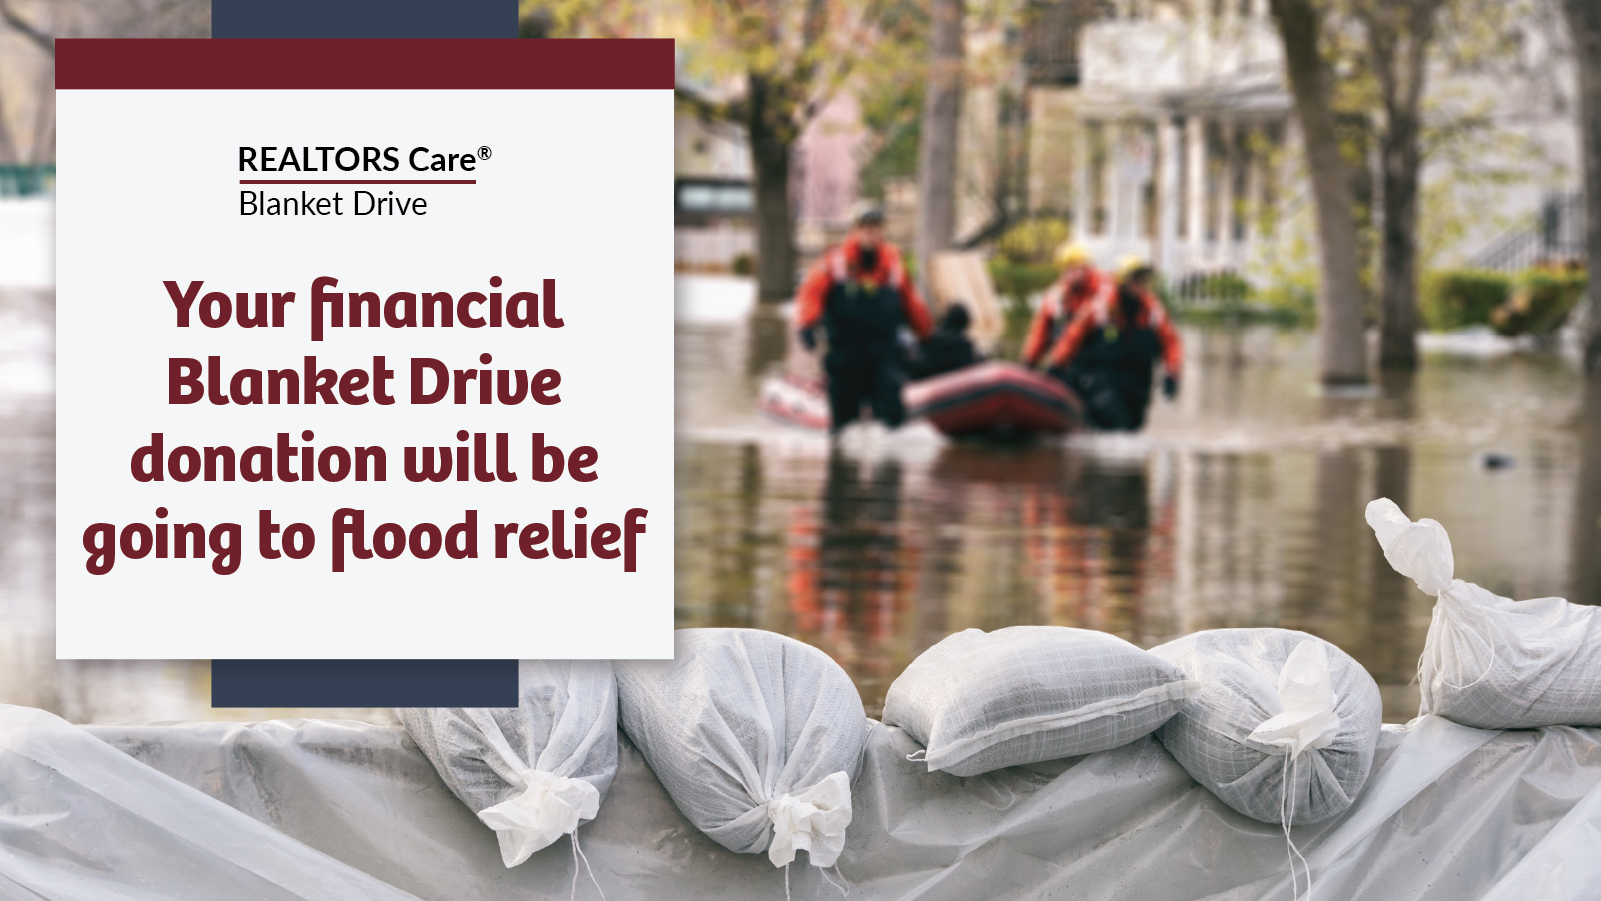 The 27th annual REALTORS Care® Blanket Drive extended to support BC’s disaster relief efforts